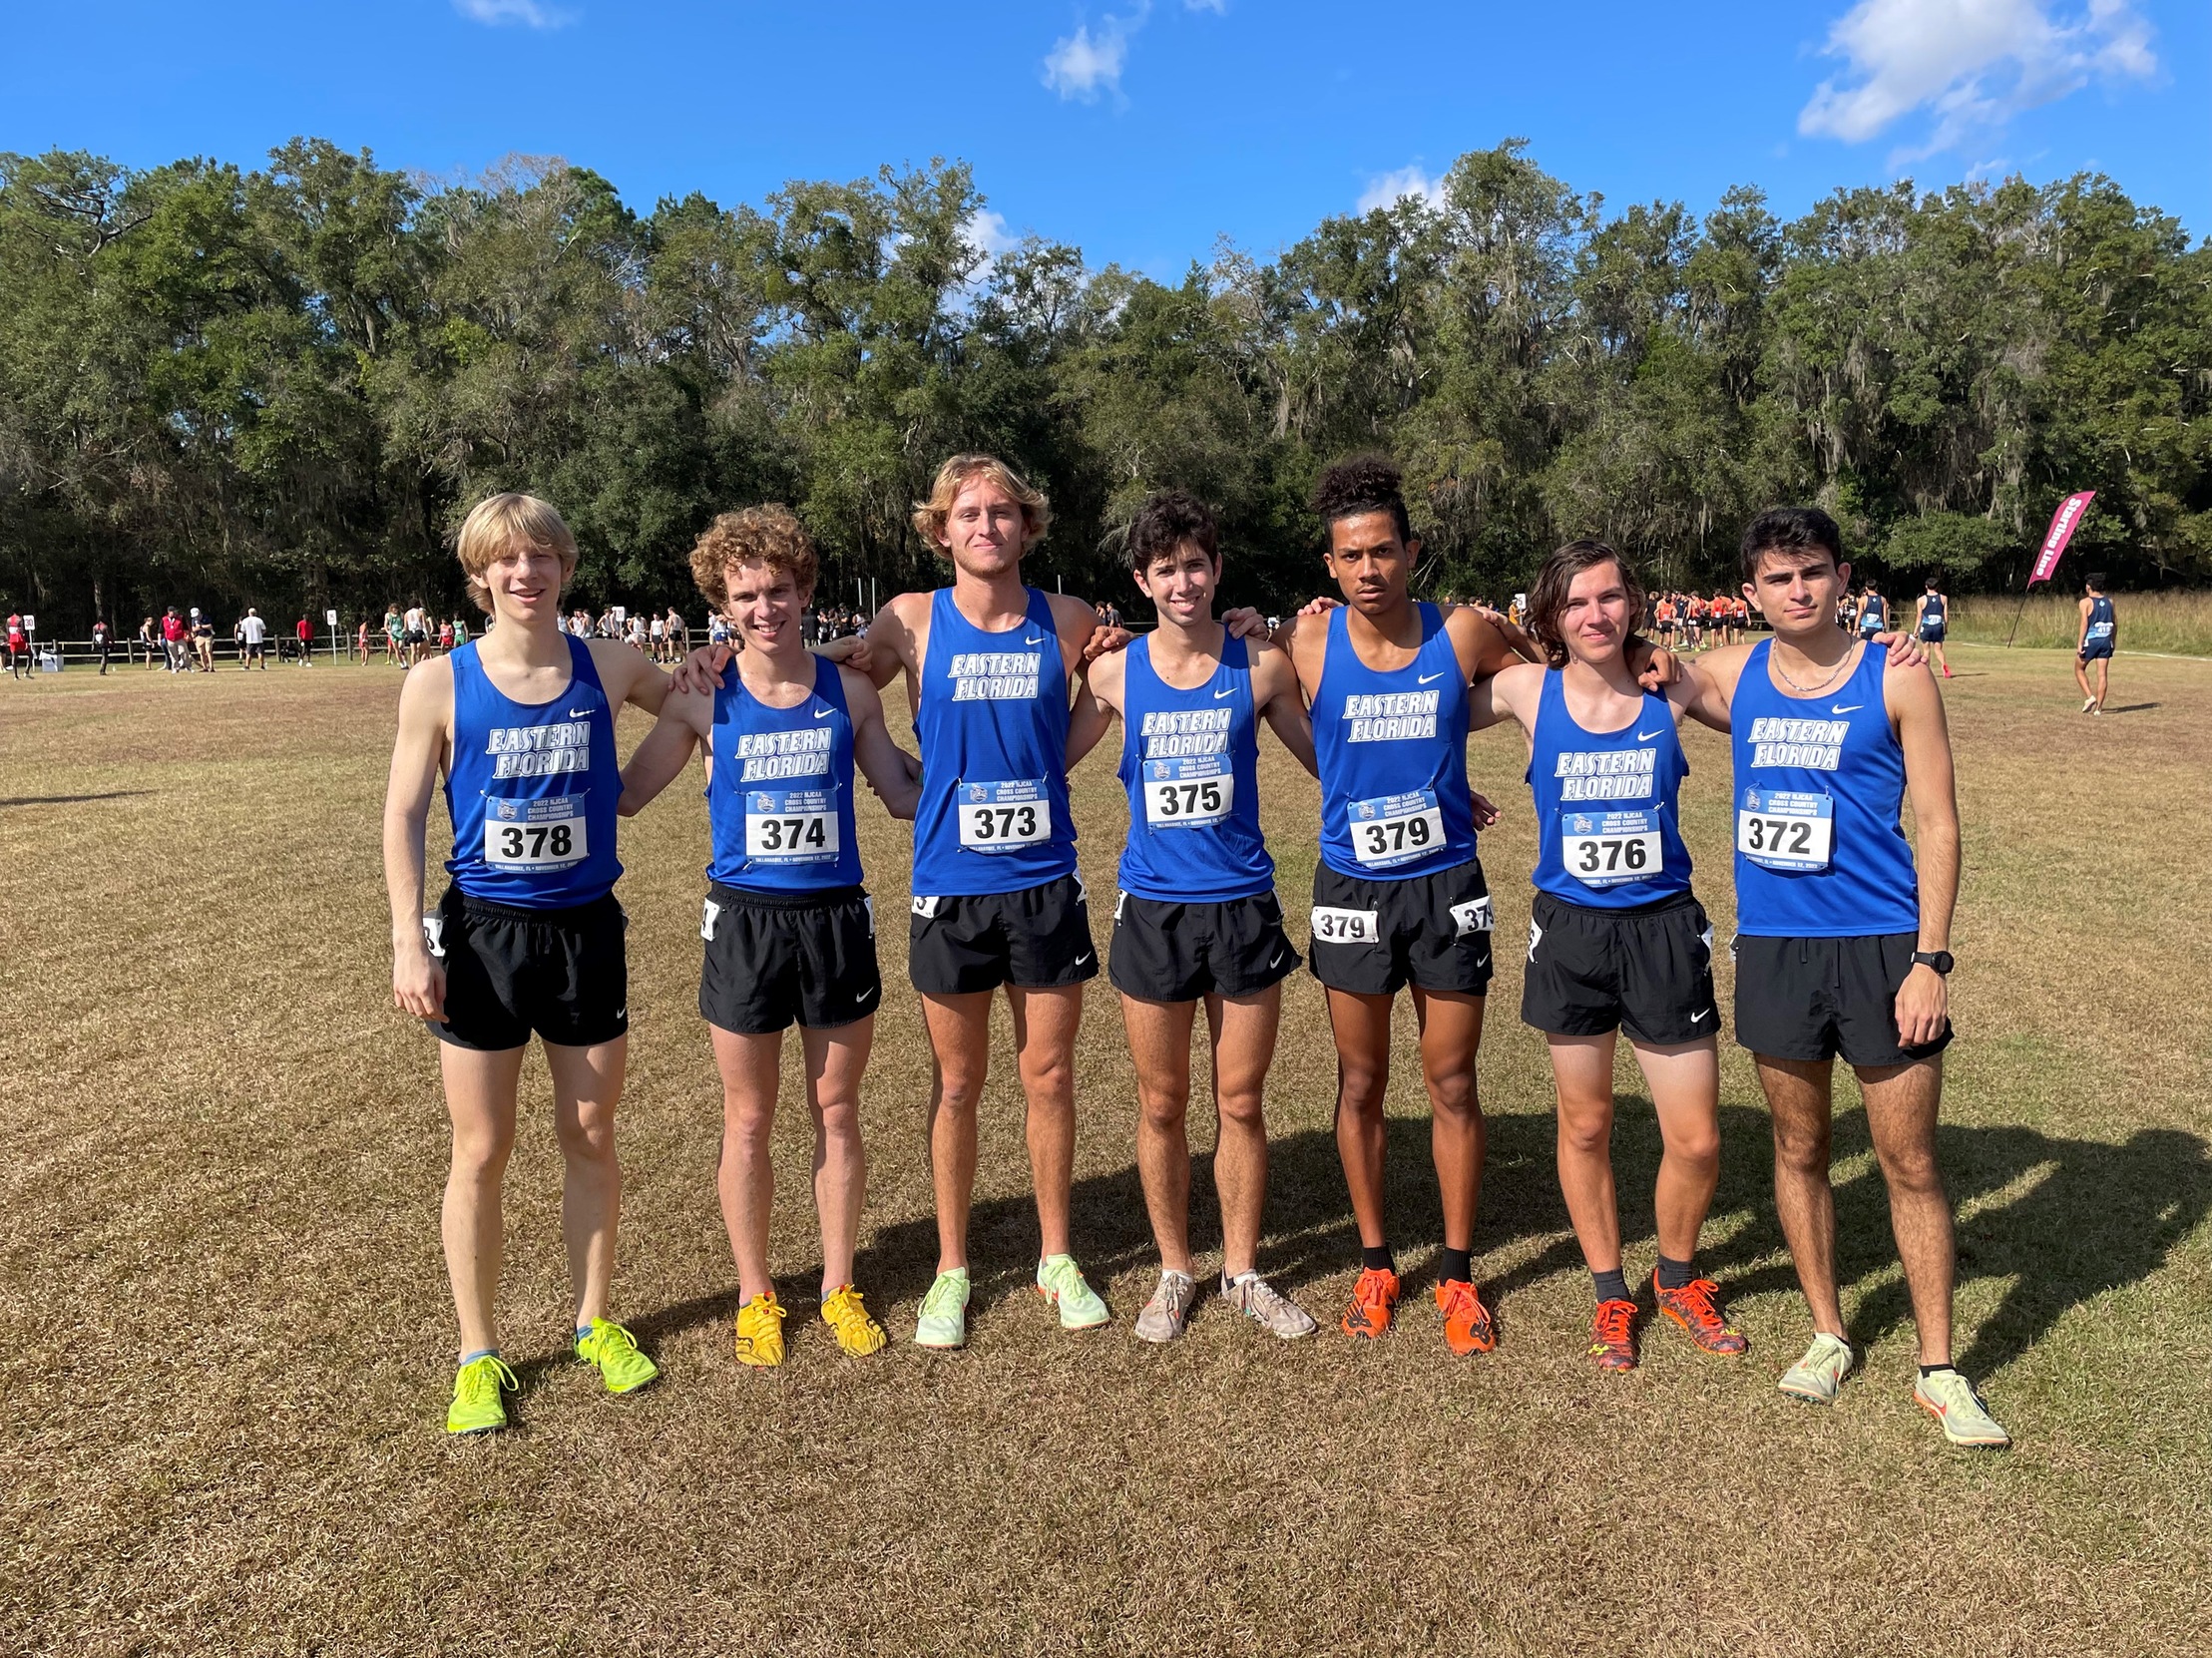 Men's cross country team placed 15th at national championships